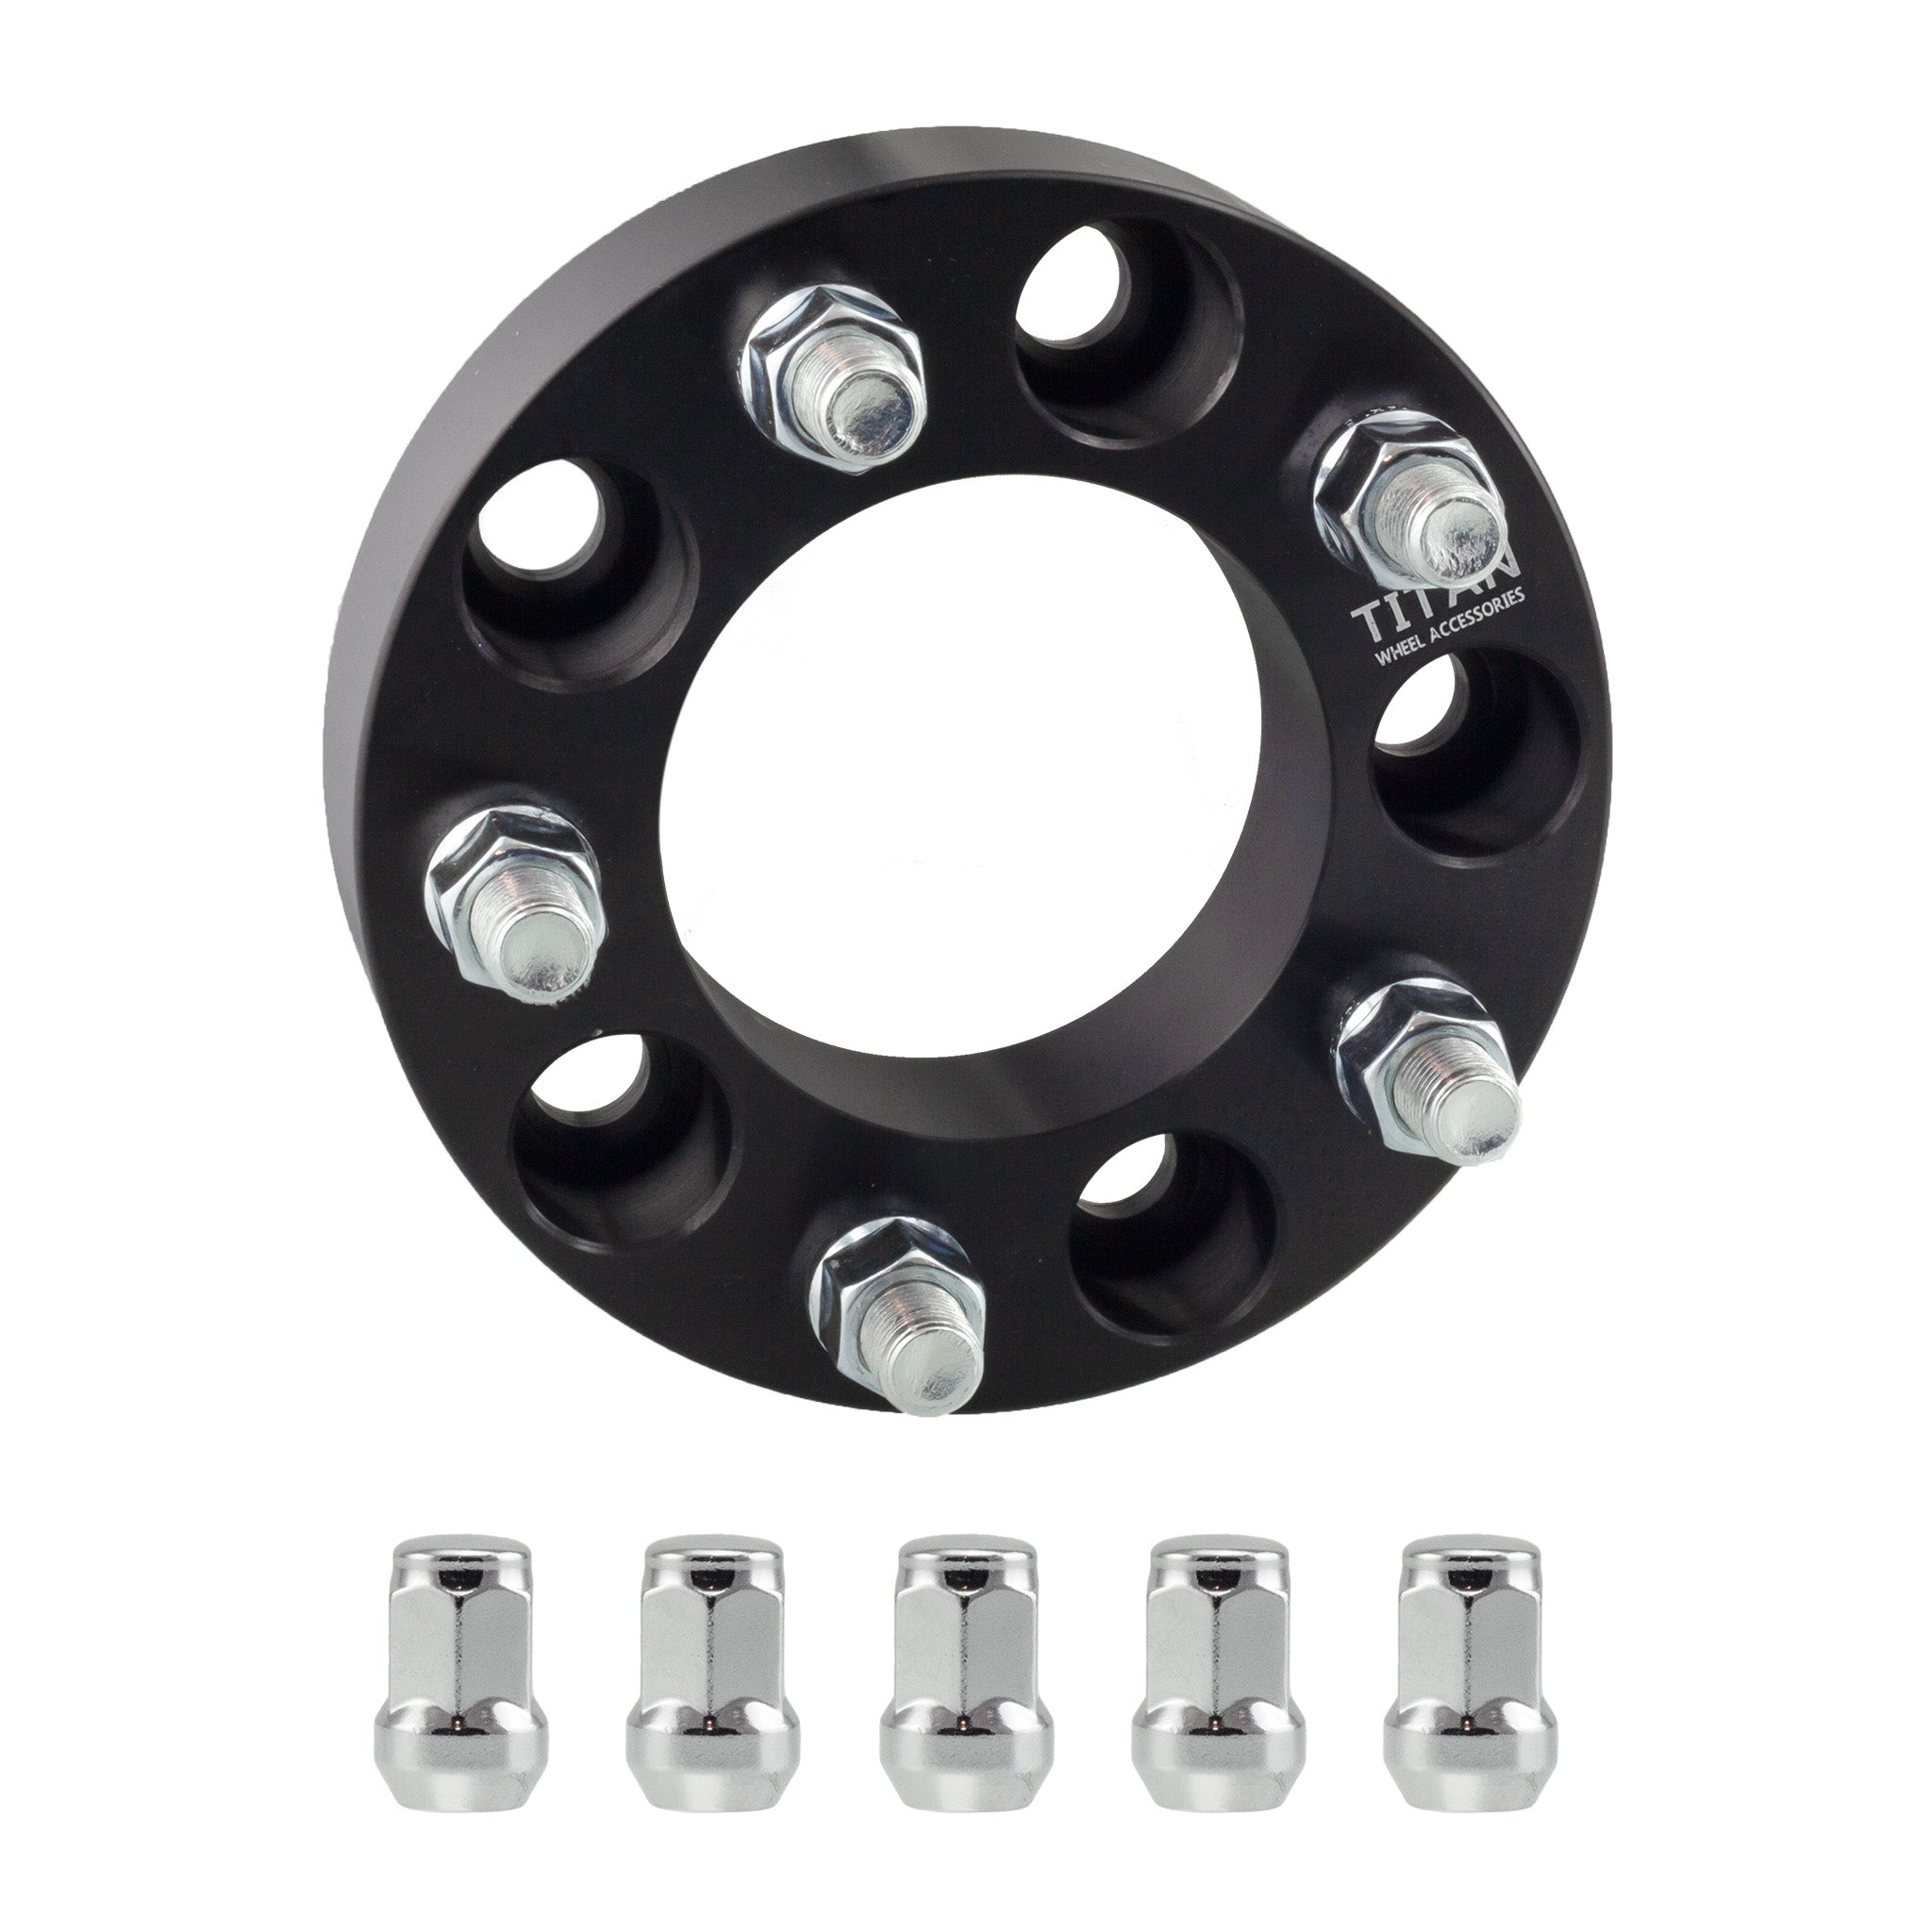 2 Inch Hubcentric Wheel Spacers for Dodge Ram 1500 | 5x5.5 (5x139